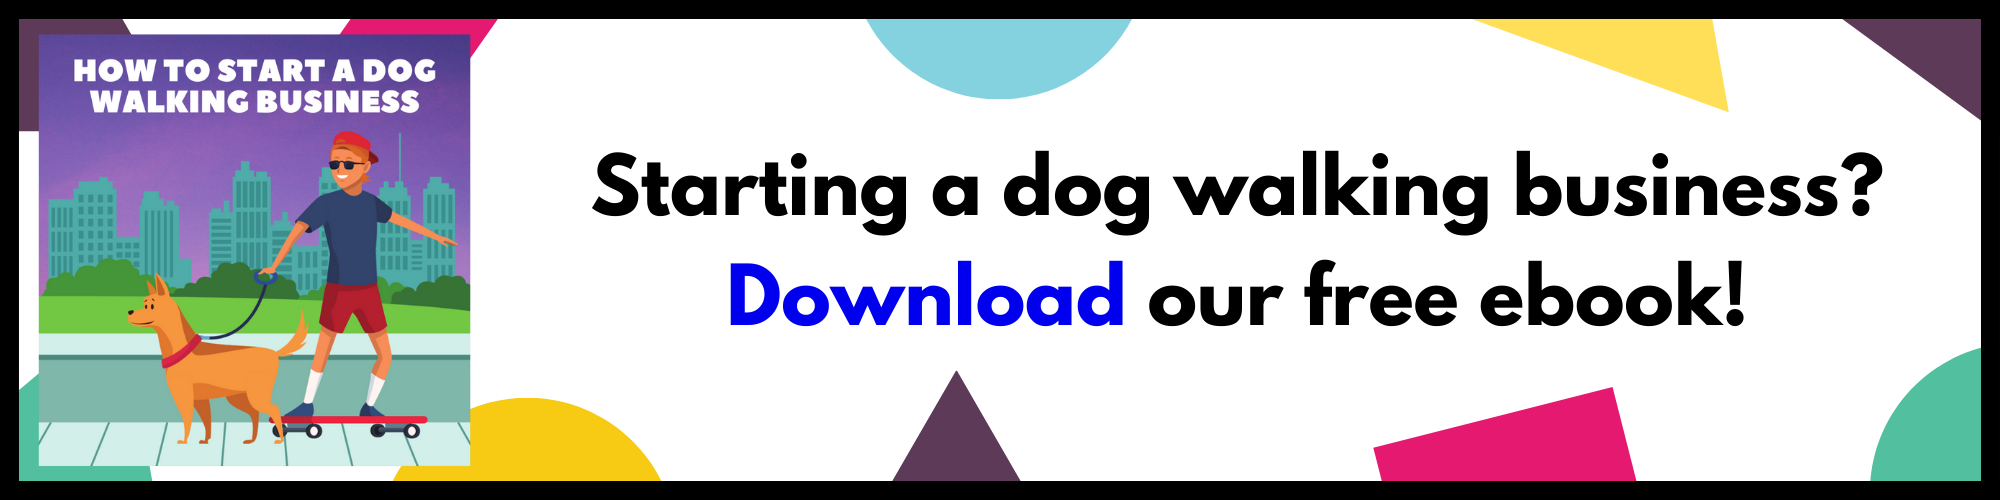 how-to-start-a-dog-walking-business